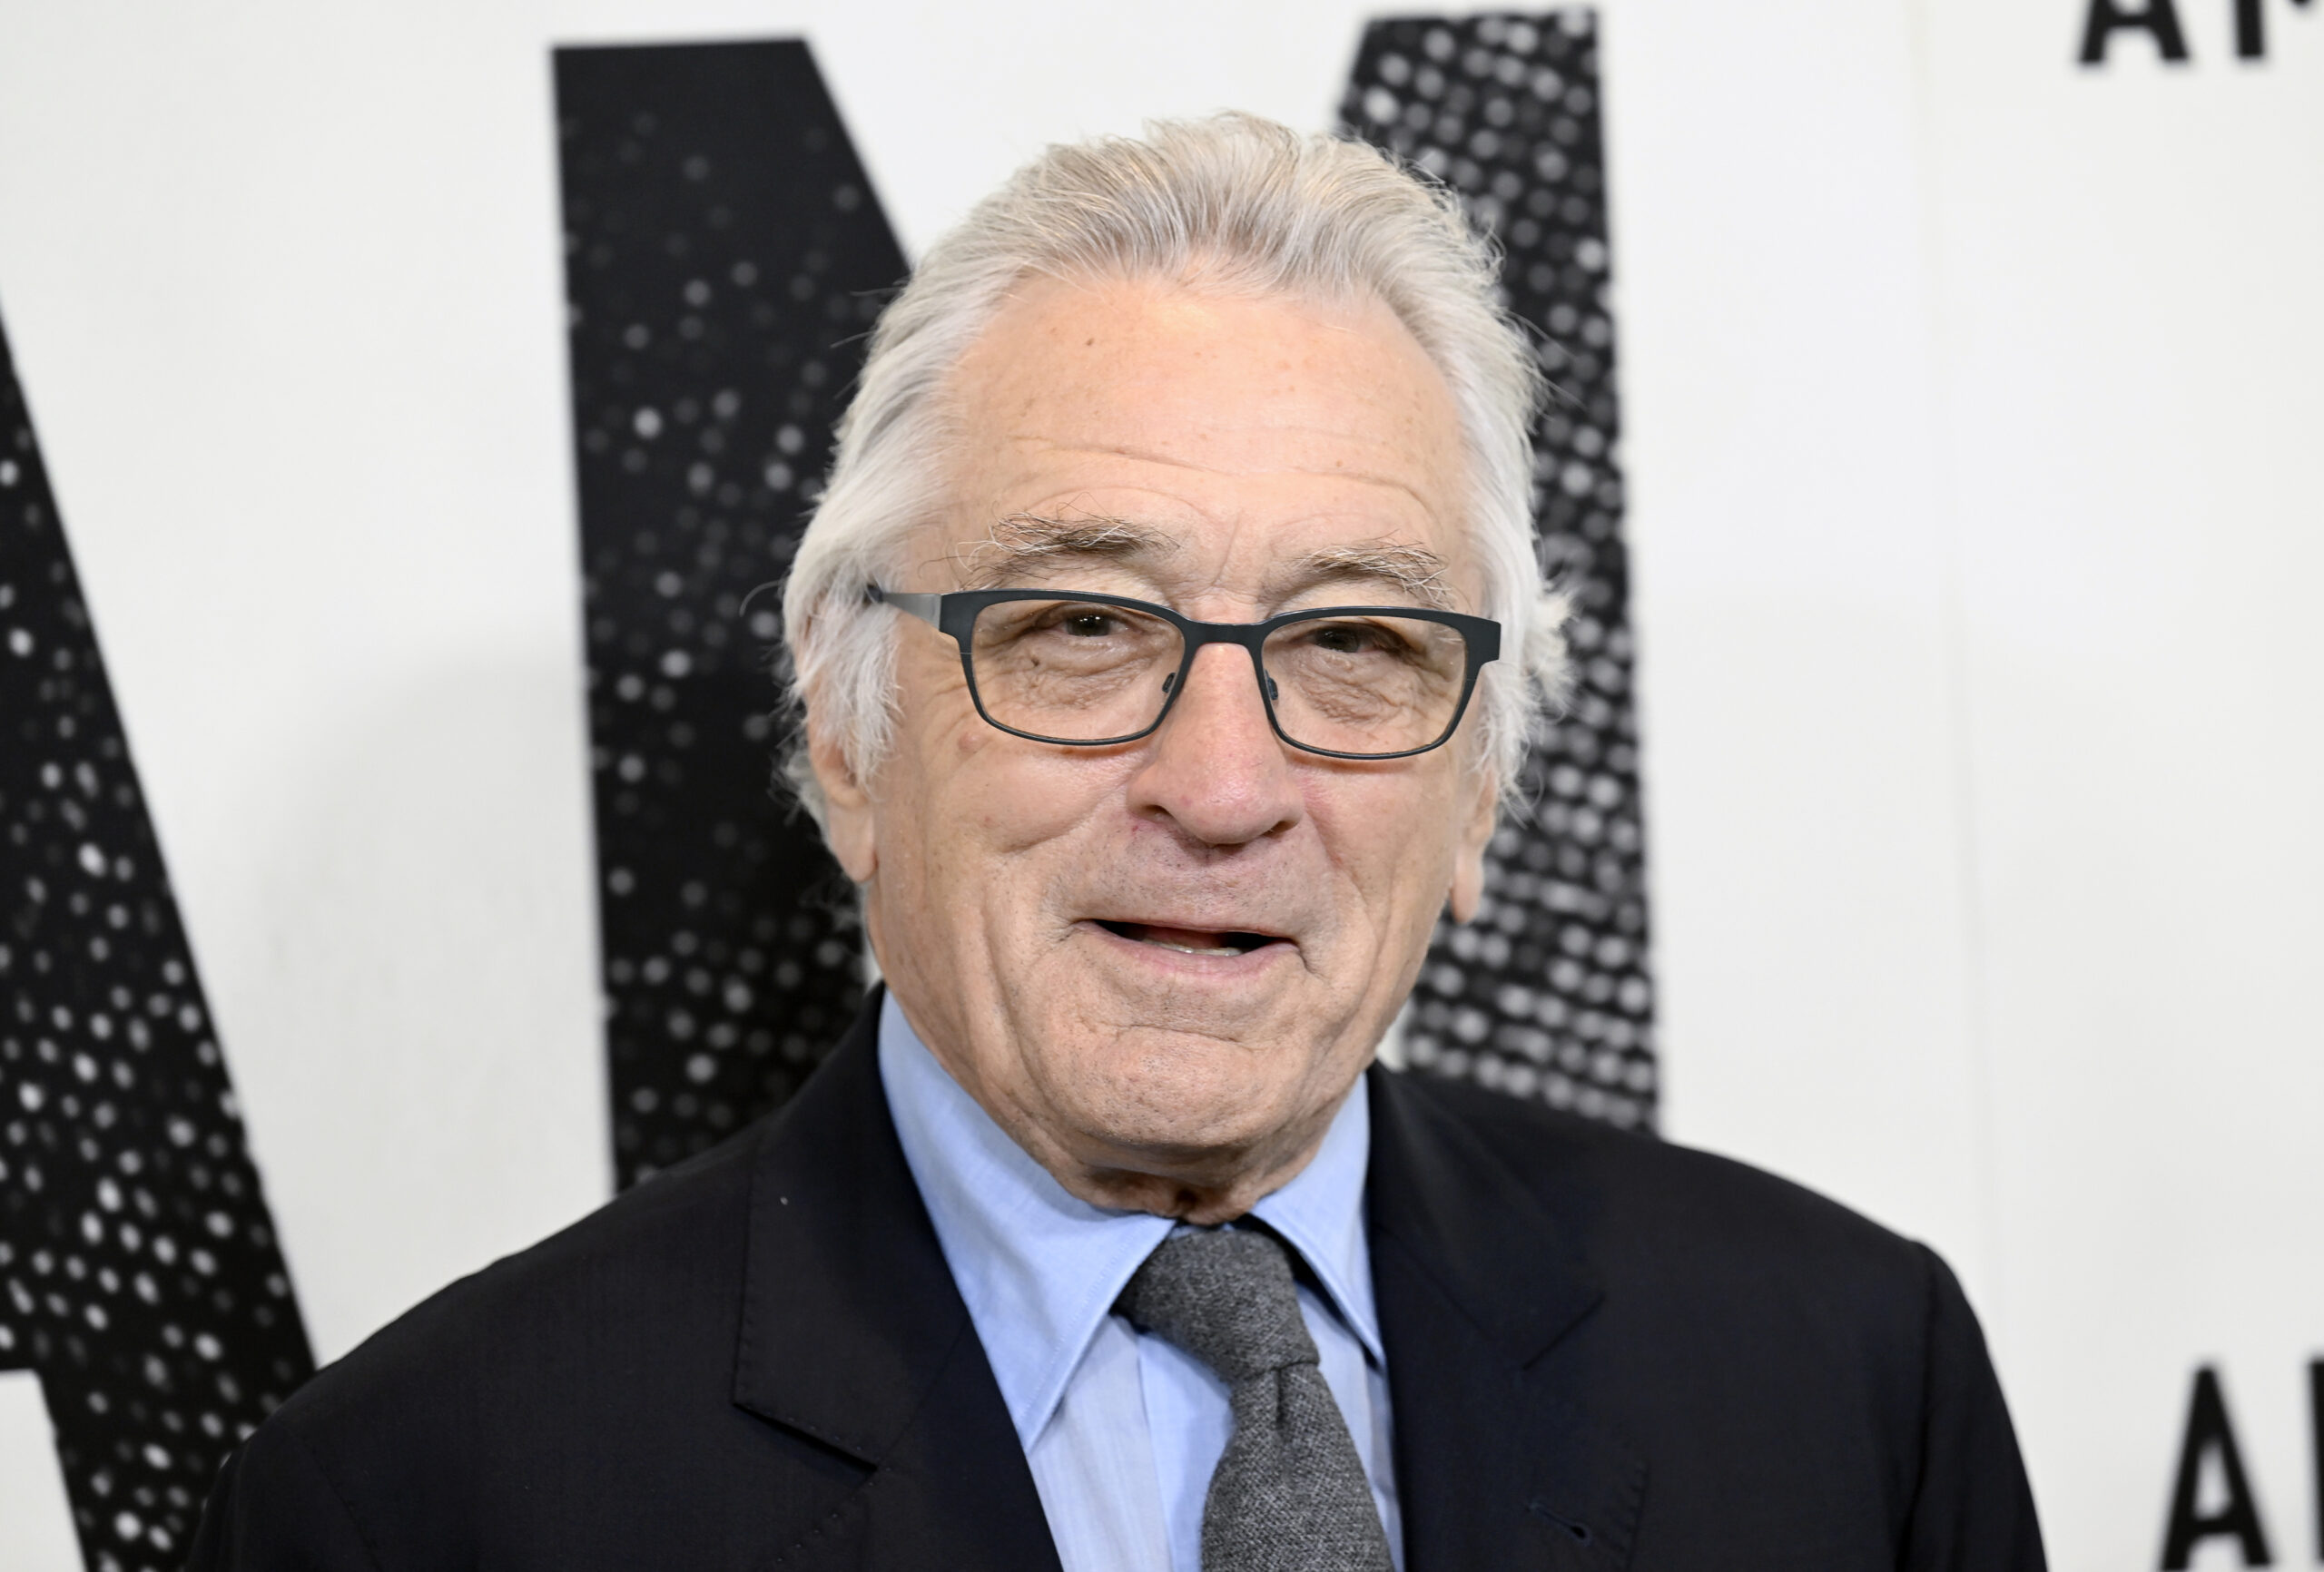 Robert De Niro, at 79, a father for the 7th time